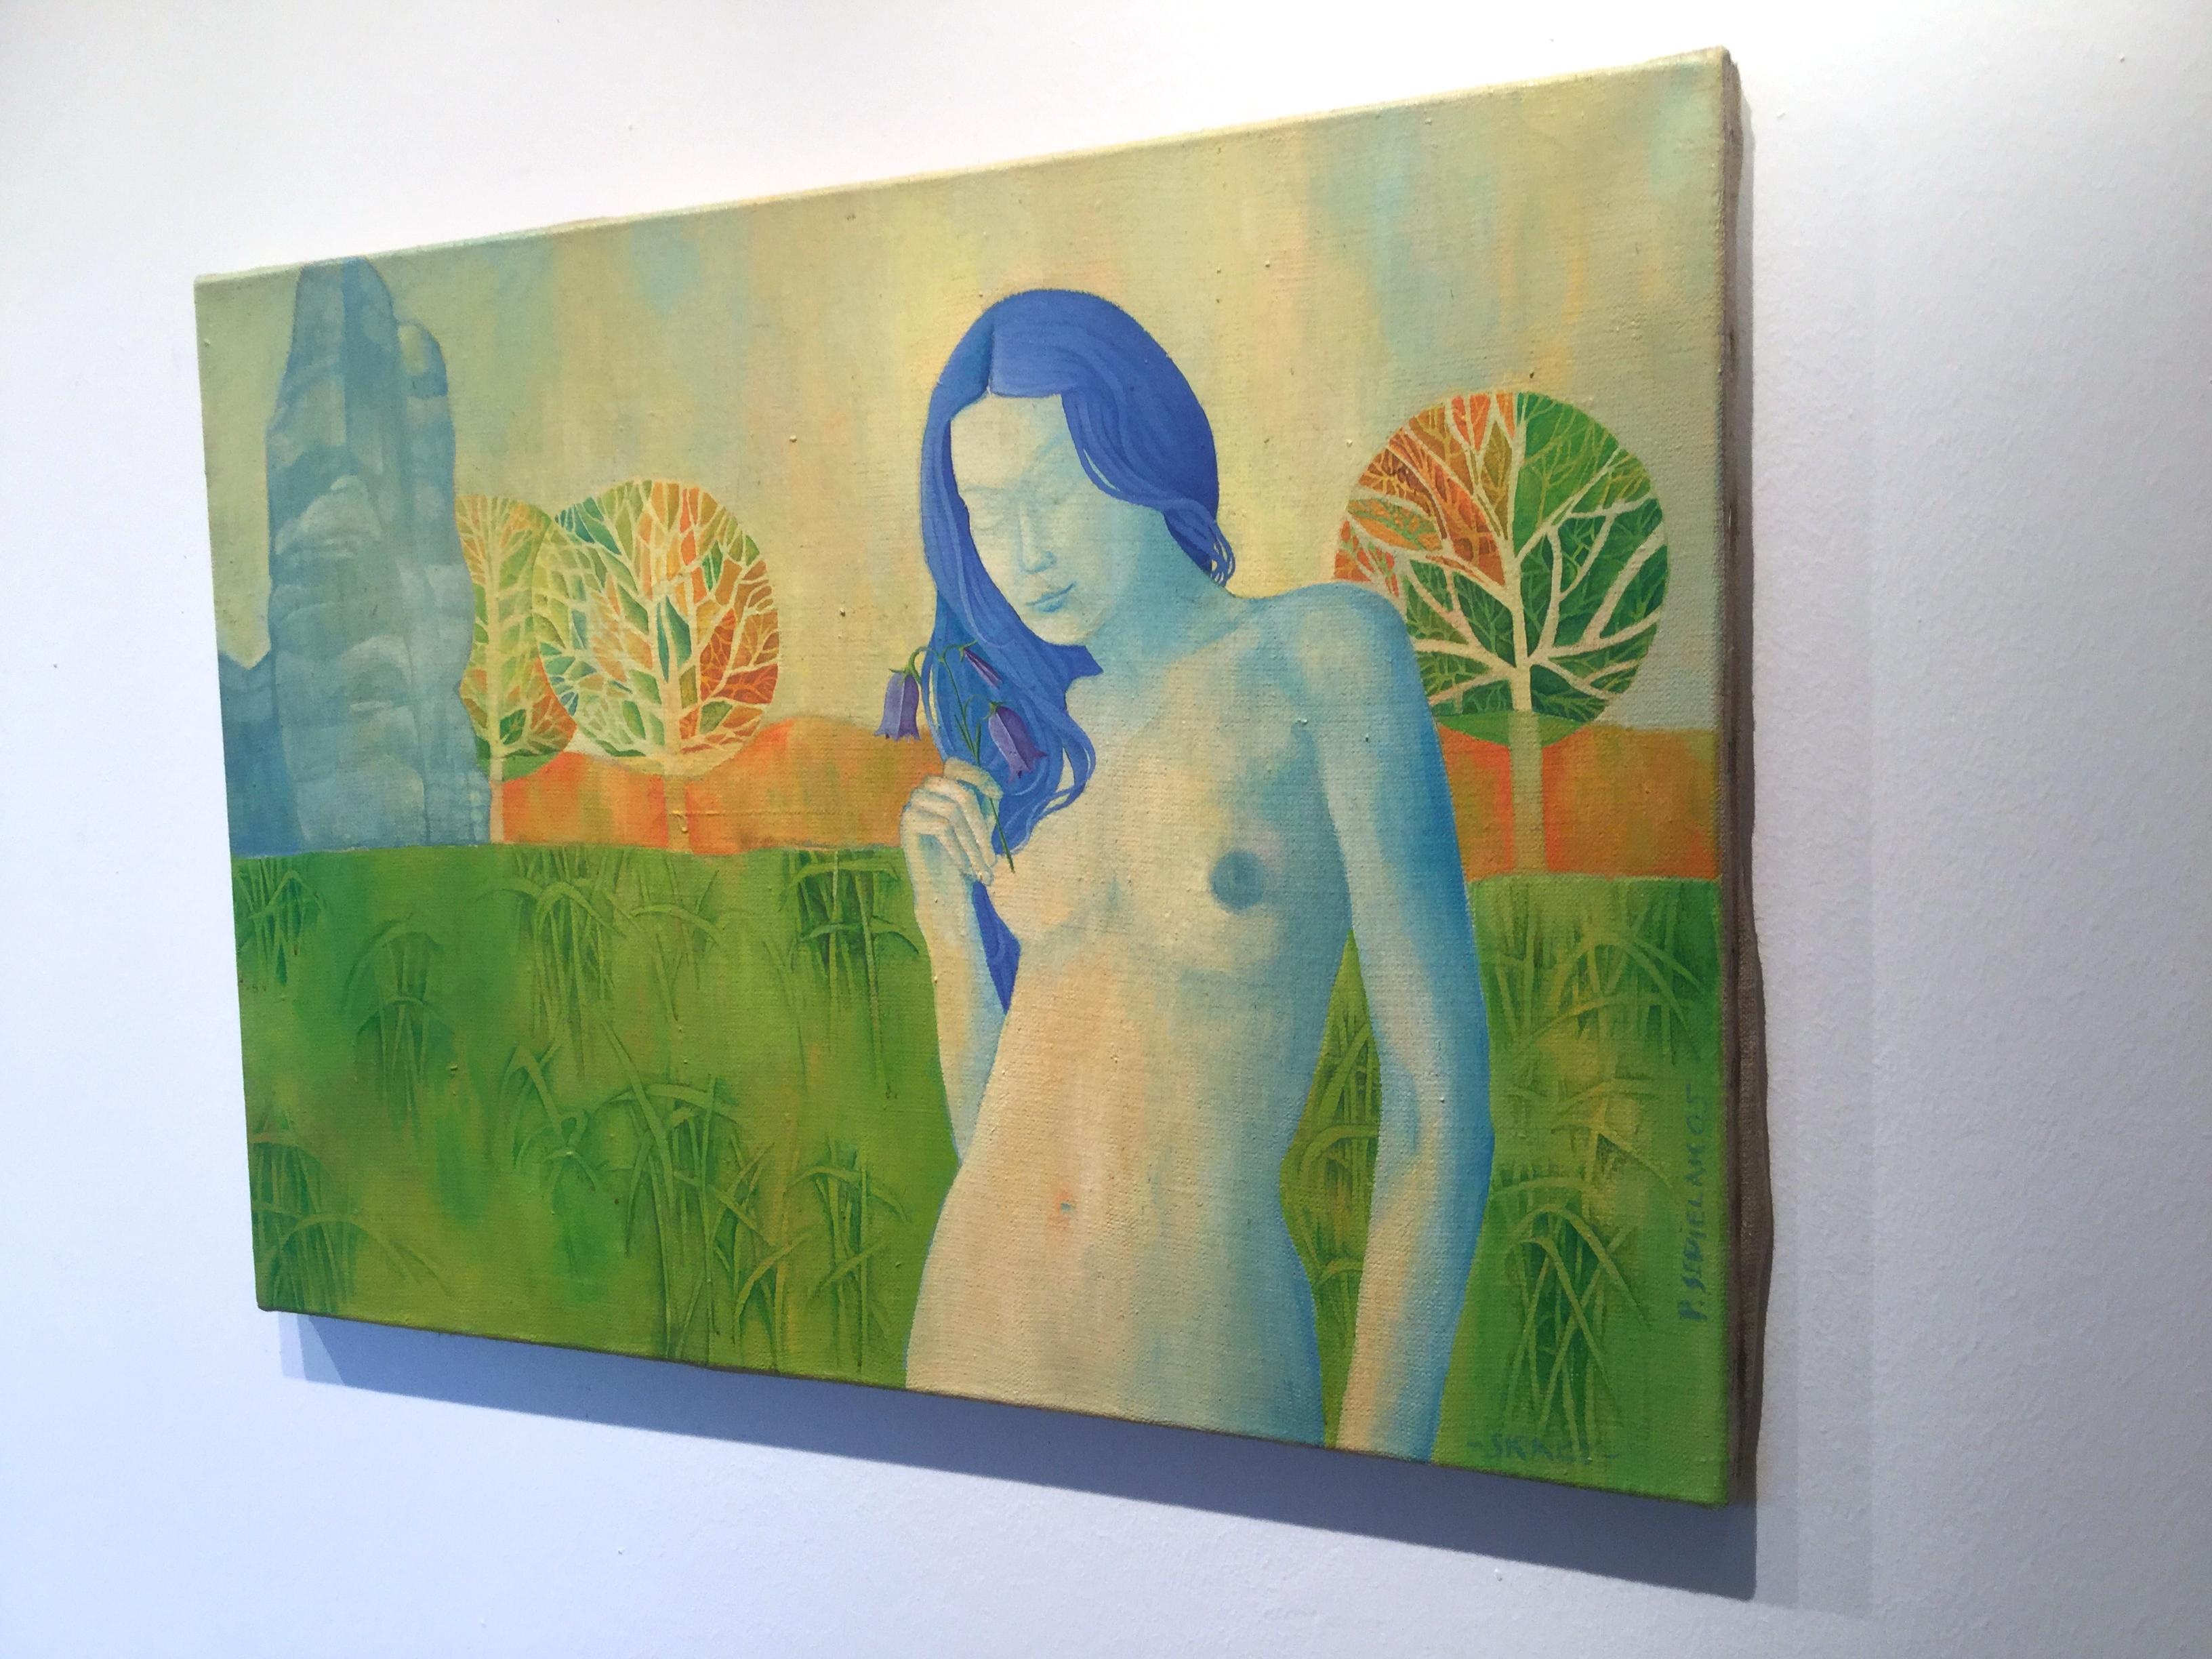 Untitled - Girl With Blue Hair - Surrealistic Oil Painting - Nude For Sale 1